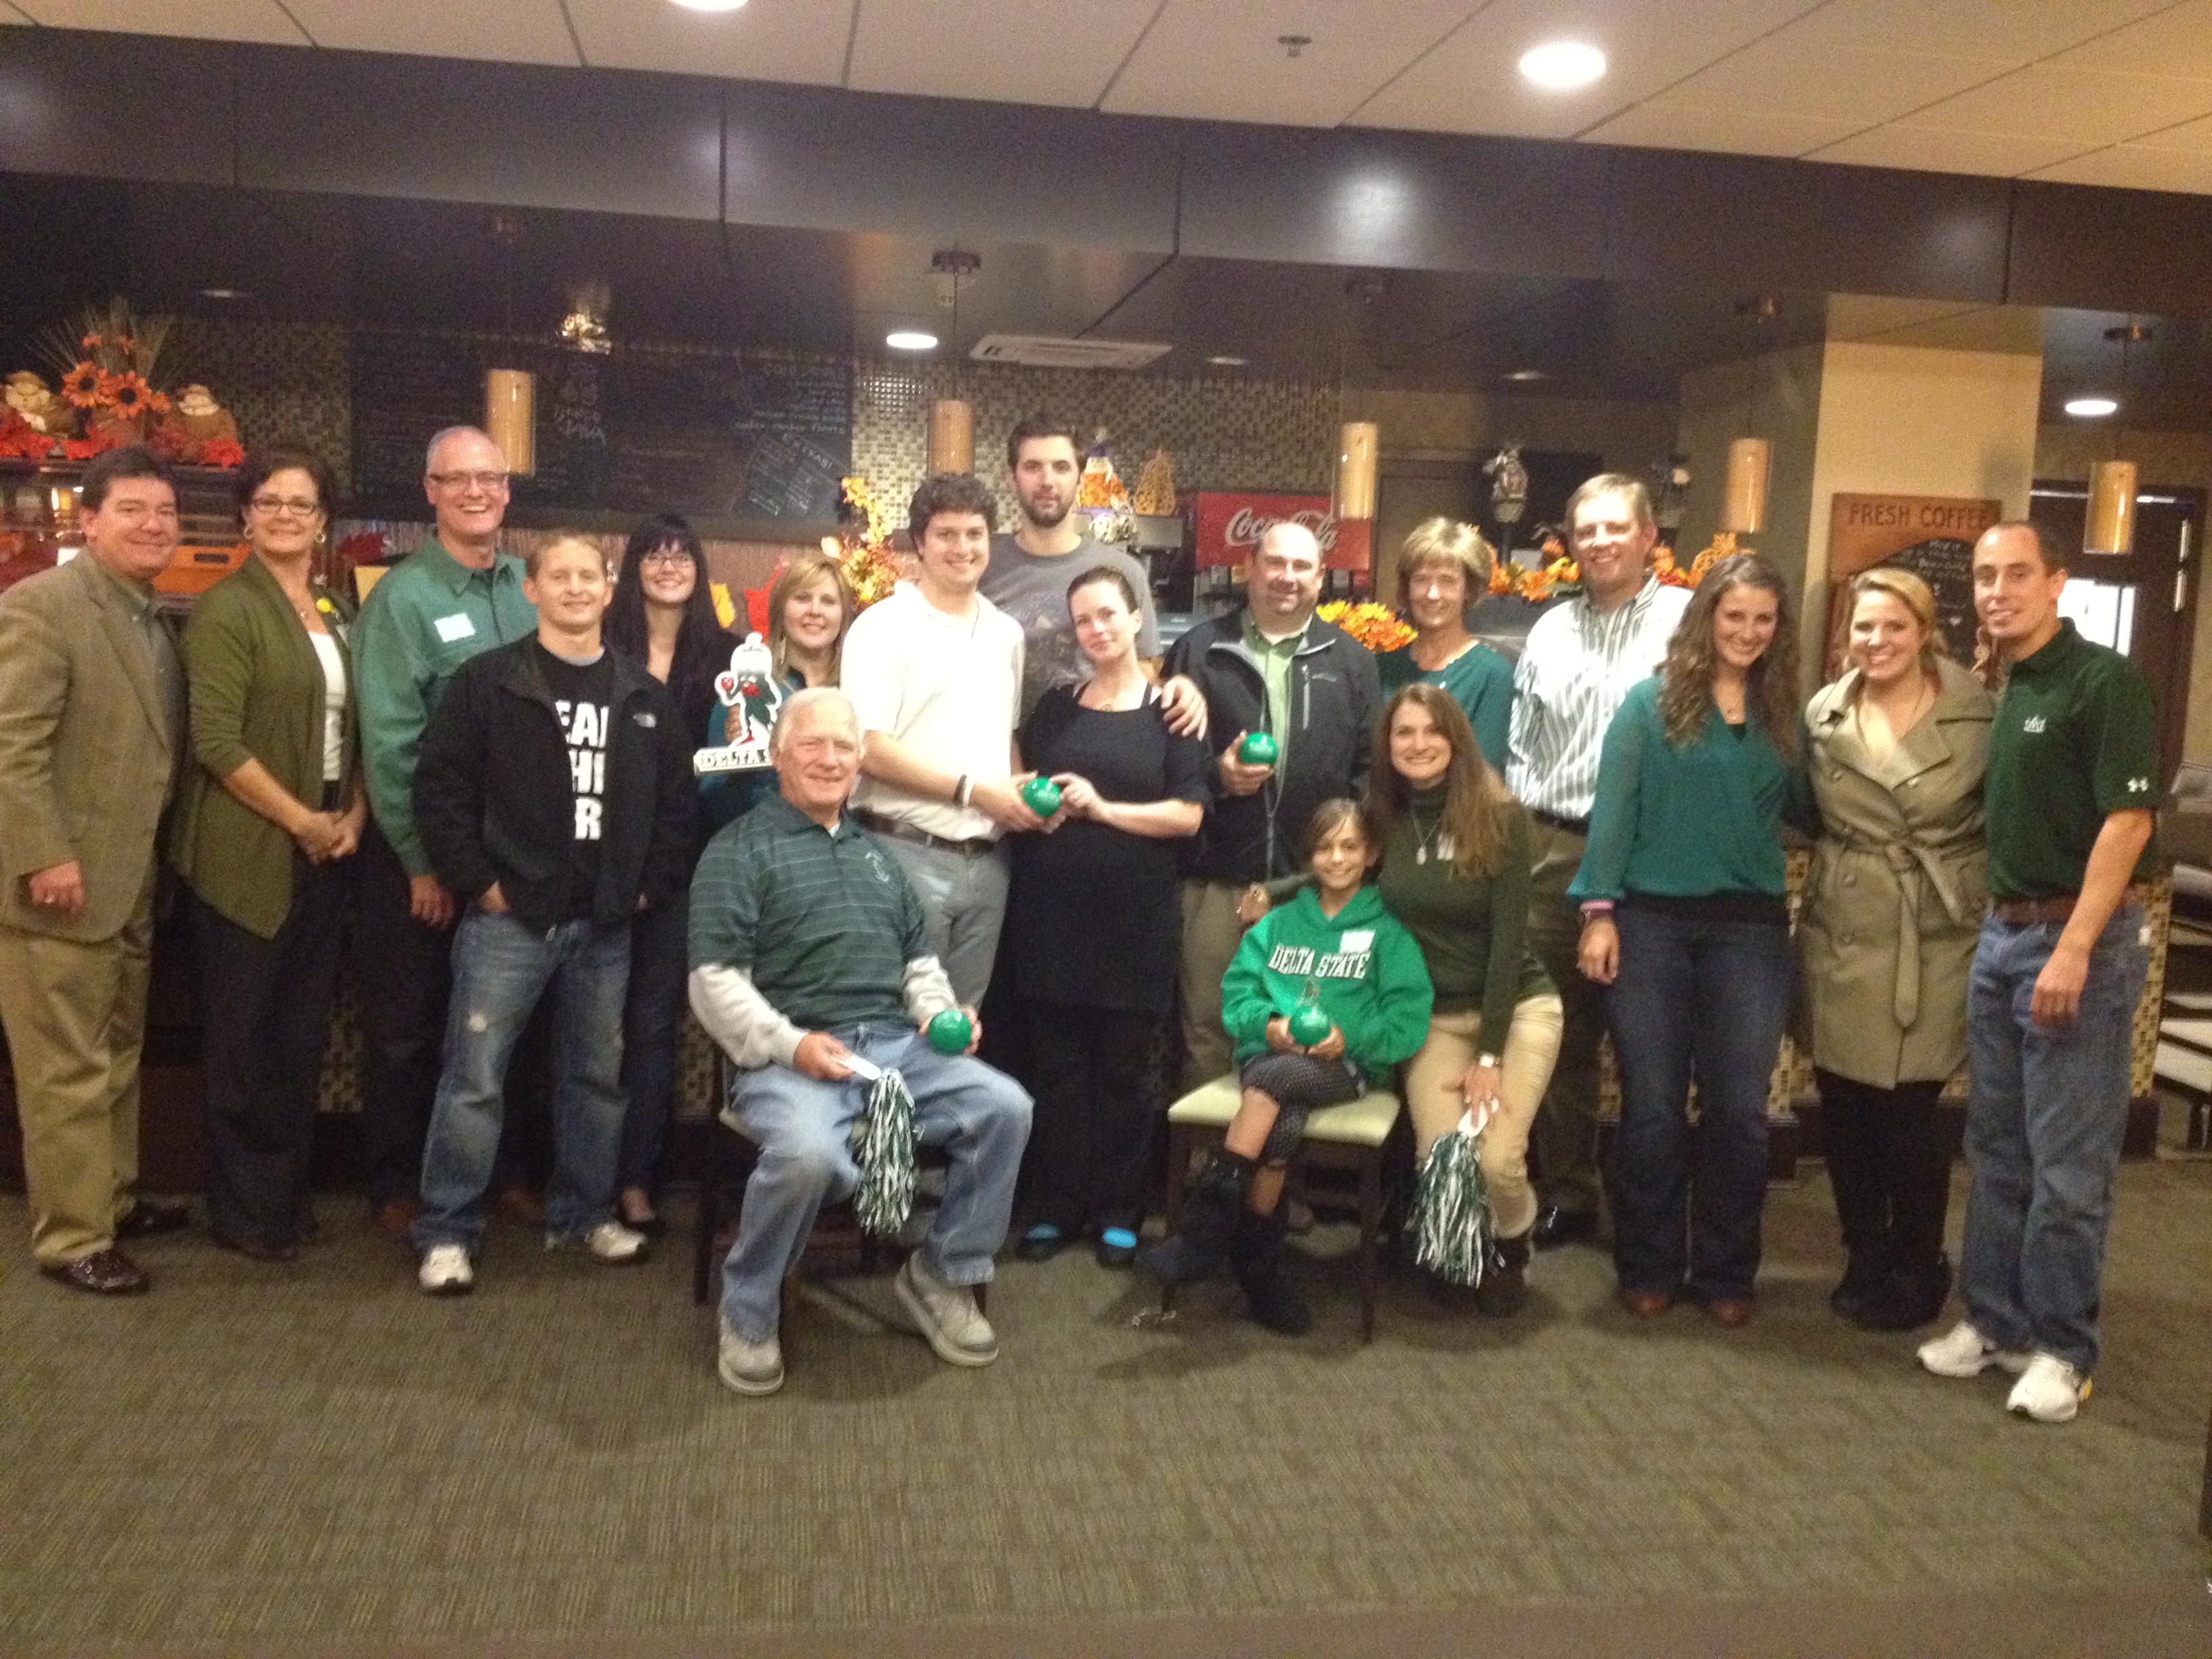 PHOTO:  Nashville area alumni and friends of Delta State University gathered at the Holiday Inn Vanderbilt prior to the basketball game between the Statesmen and the Vanderbilt Commodores.